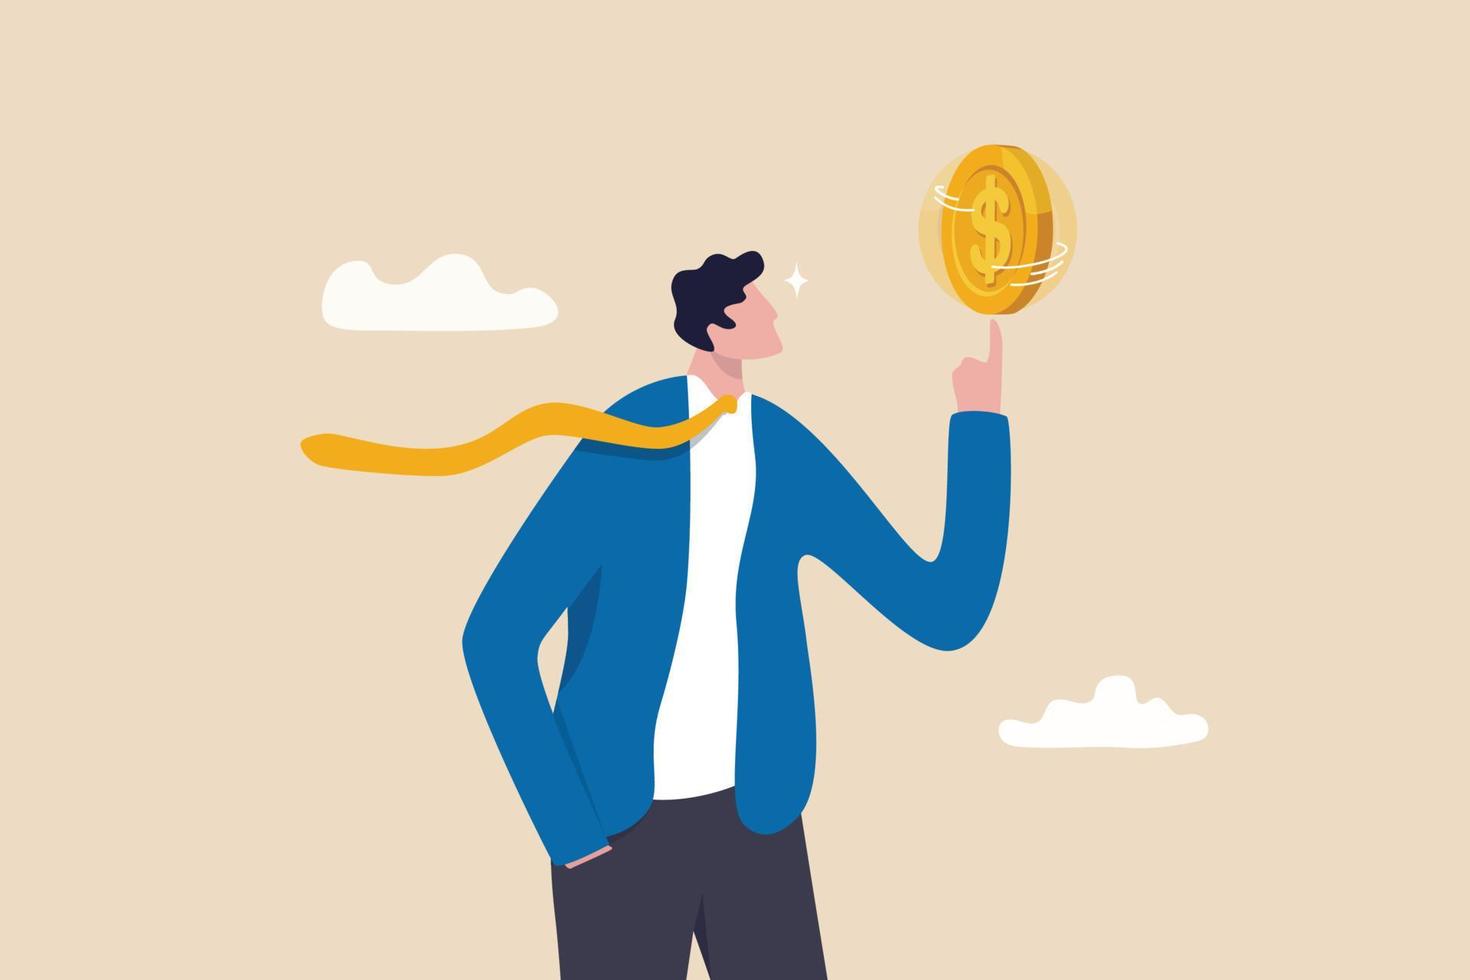 Financial plan investment strategy, decision to make profit or pay off debt, contemplation or thinking about savings and wealth concept, confident businessman spinning big money coin on his finger. vector